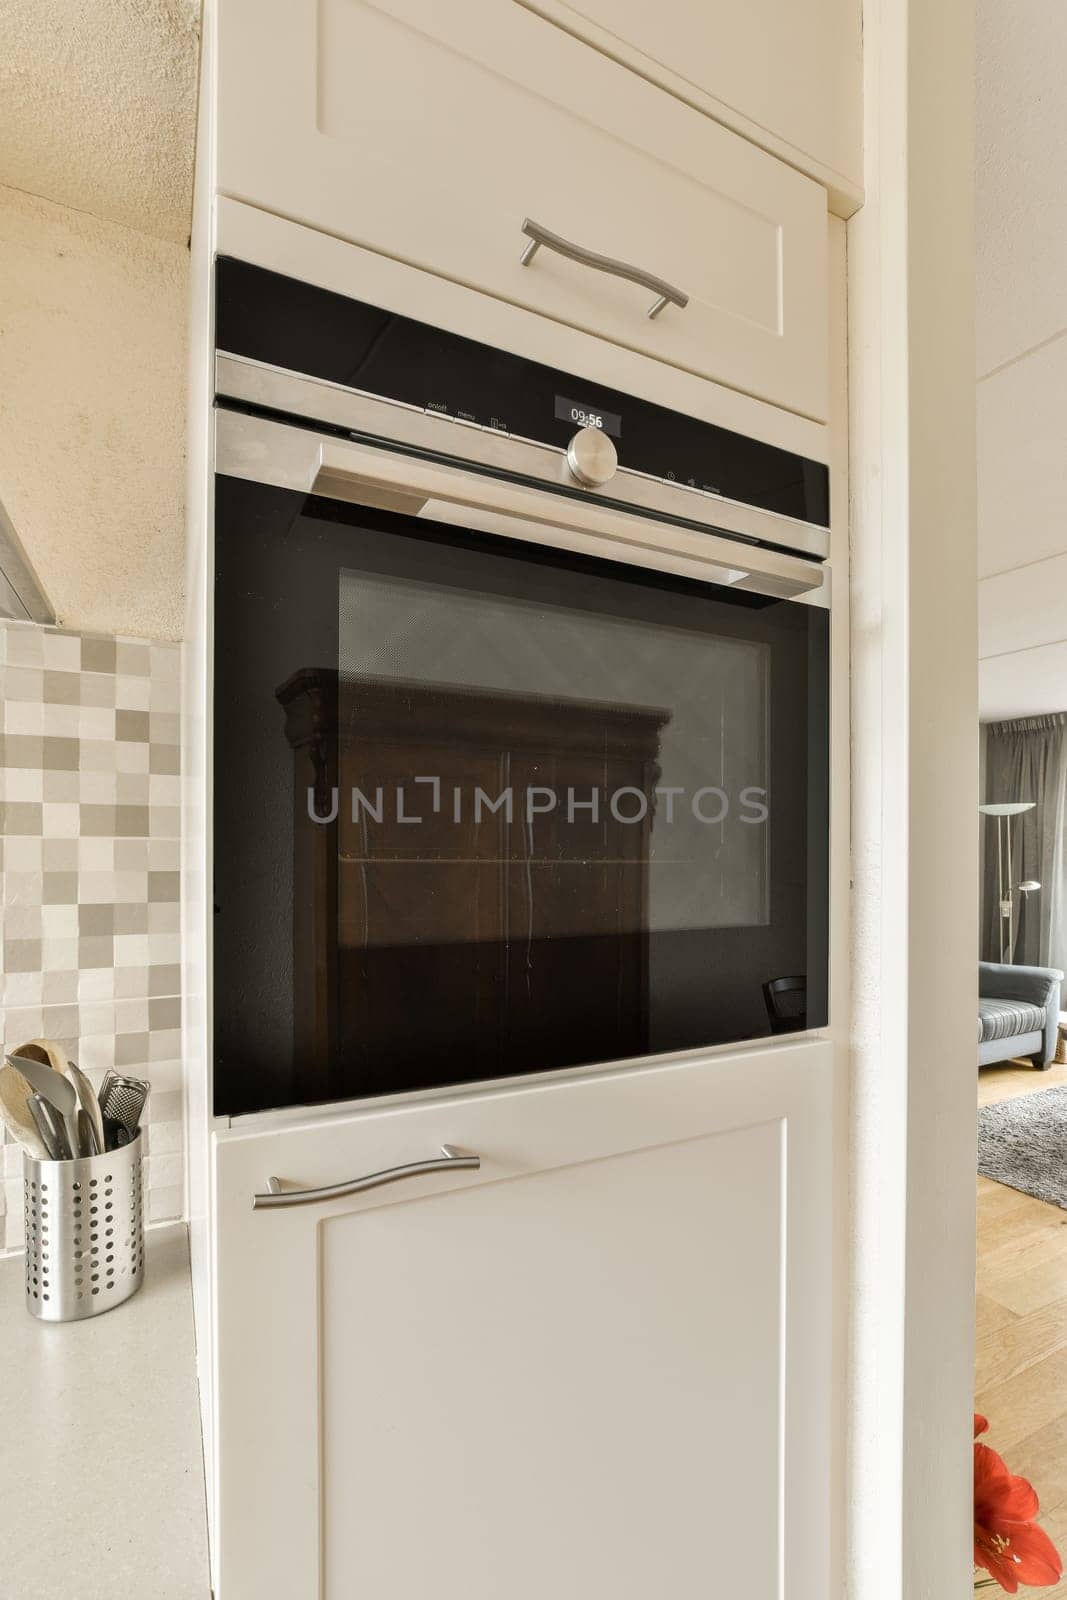 a kitchen with an oven on the wall and some uts in the cabinet door open to show how it is going